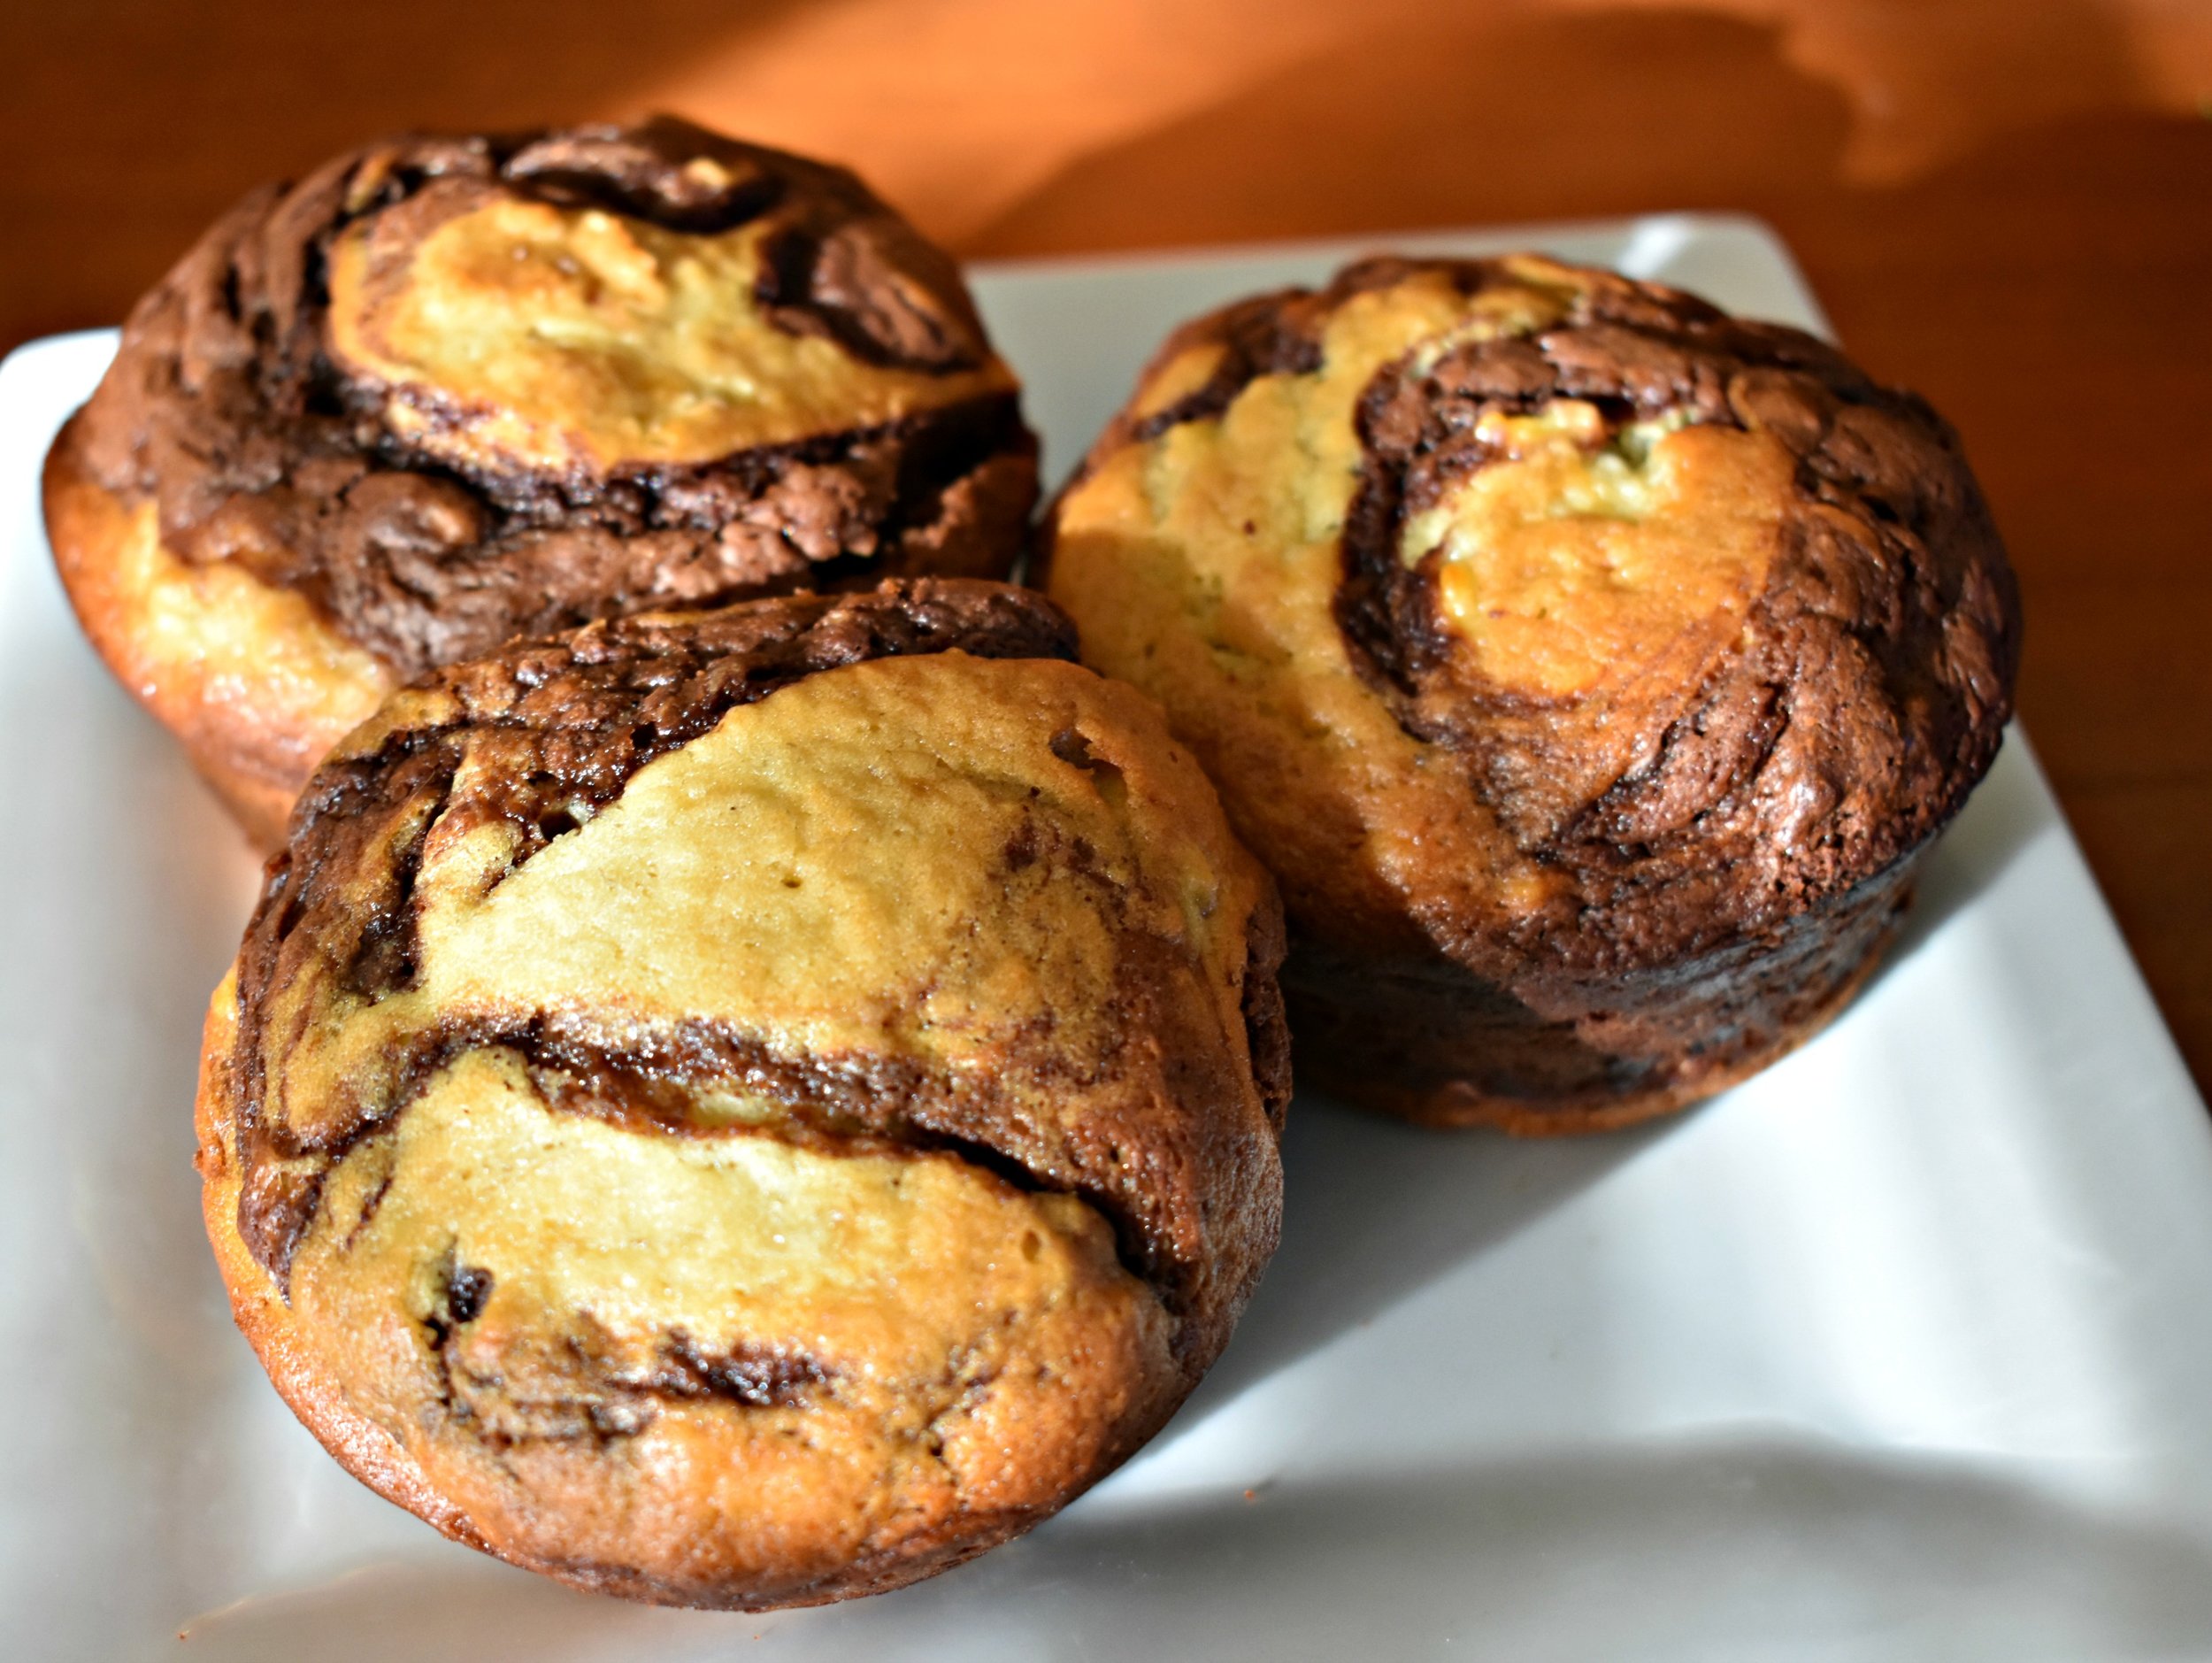 Marbled Chocolate-Banana Bread/Muffins